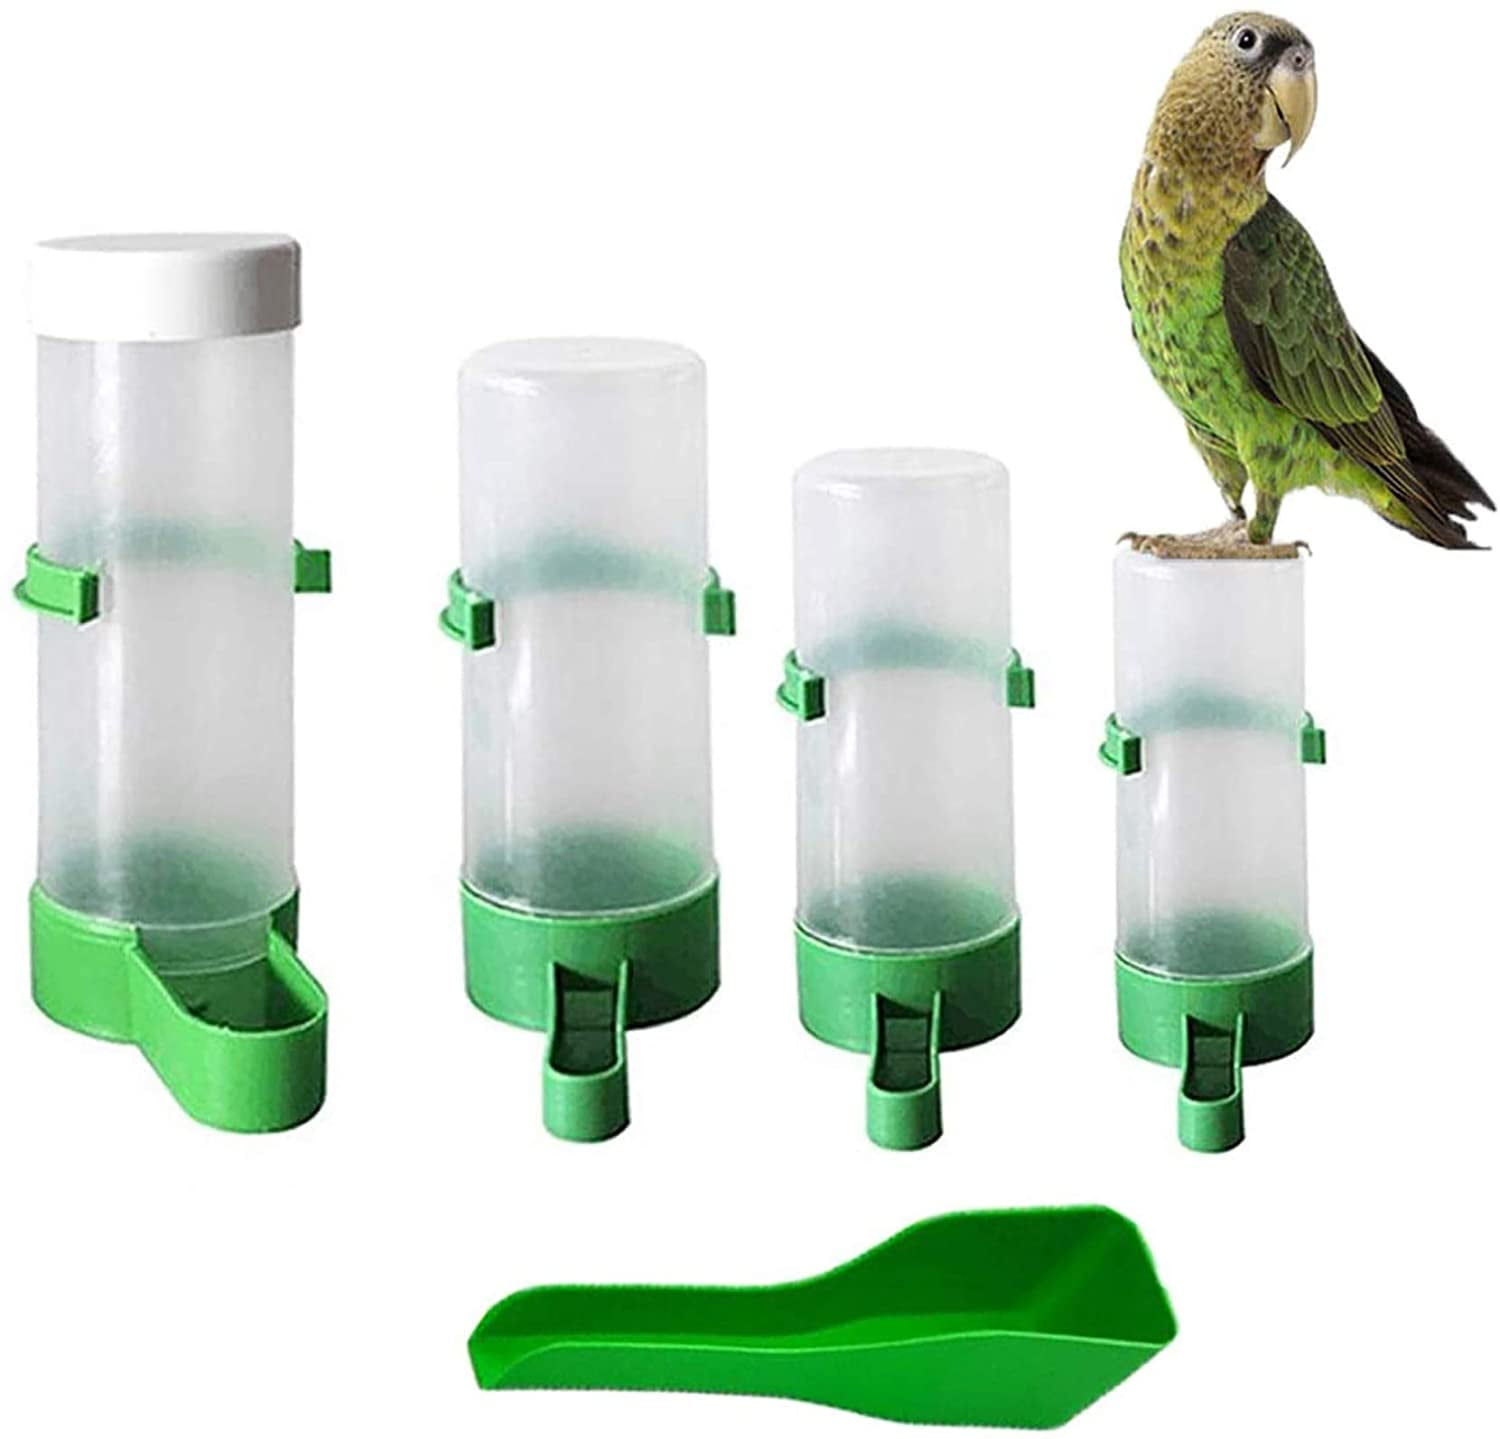 Bird Perches Plastic 19 Inch X 12mm Twin Pack Budgie Finch Canary Cage Cut Short 